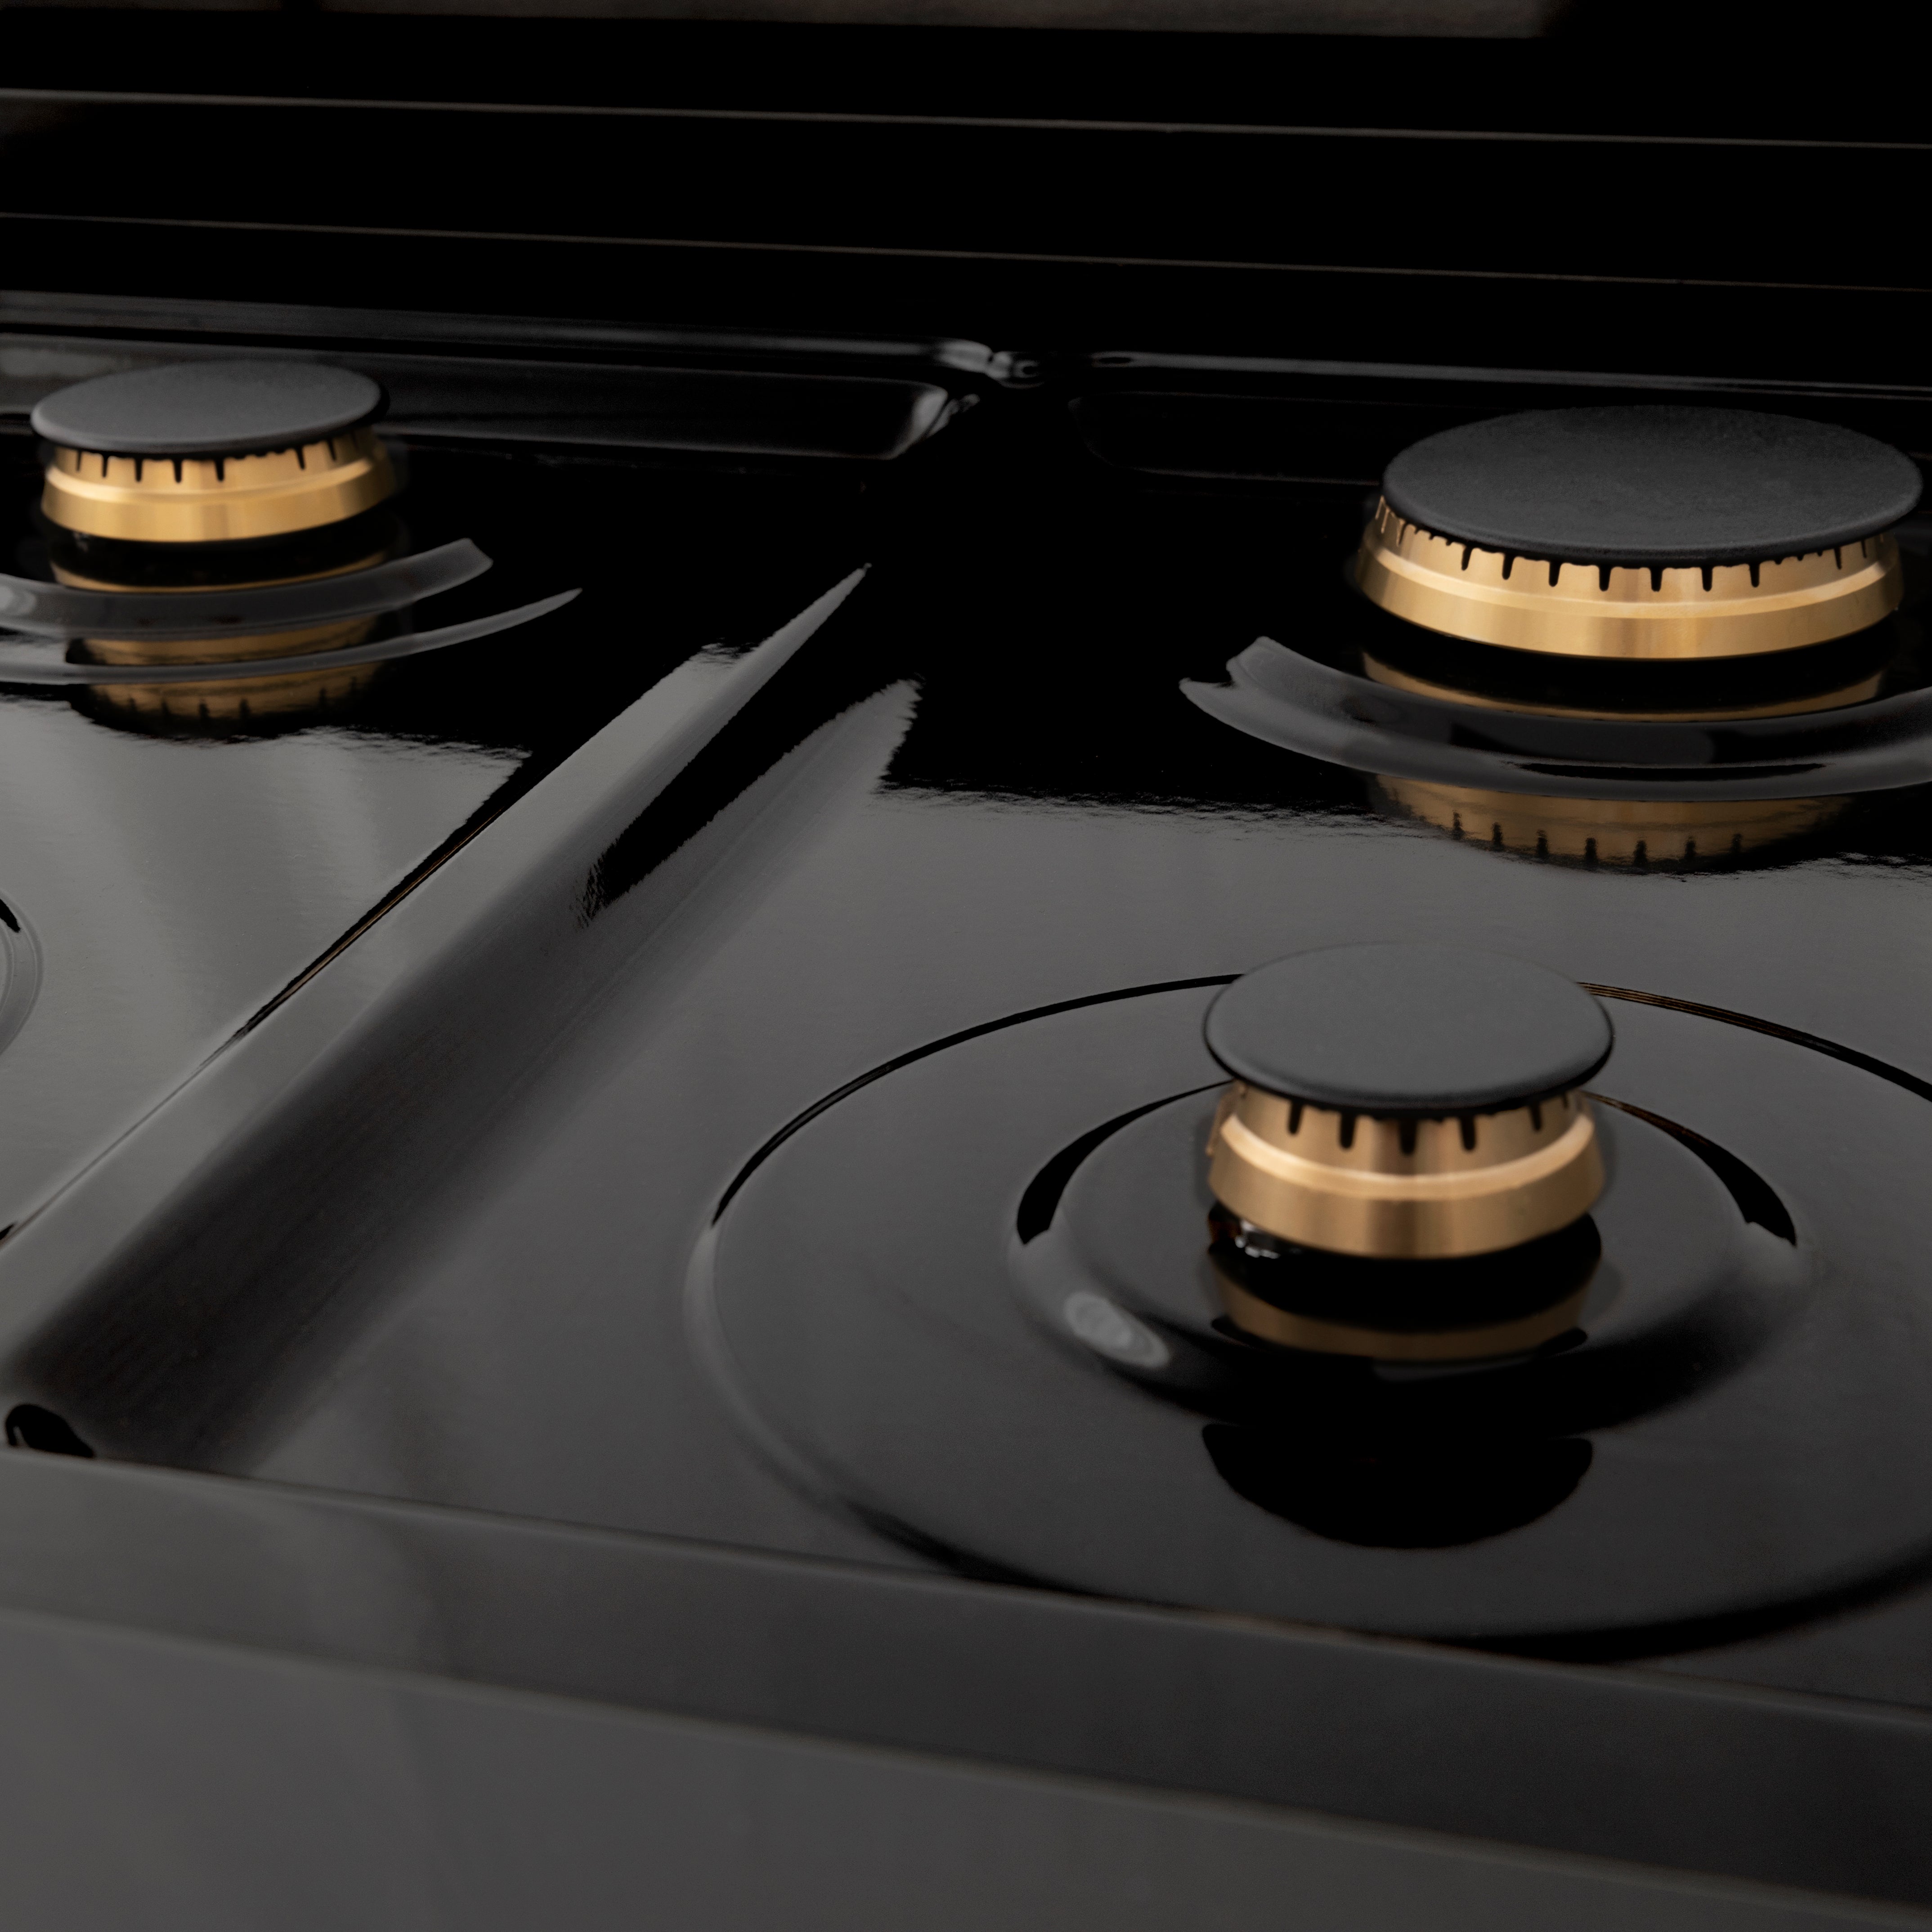 ZLINE Autograph Edition 36 in. Porcelain Rangetop with 6 Gas Burners in Black Stainless Steel and Accent Options (RTBZ-36) - New Star Living